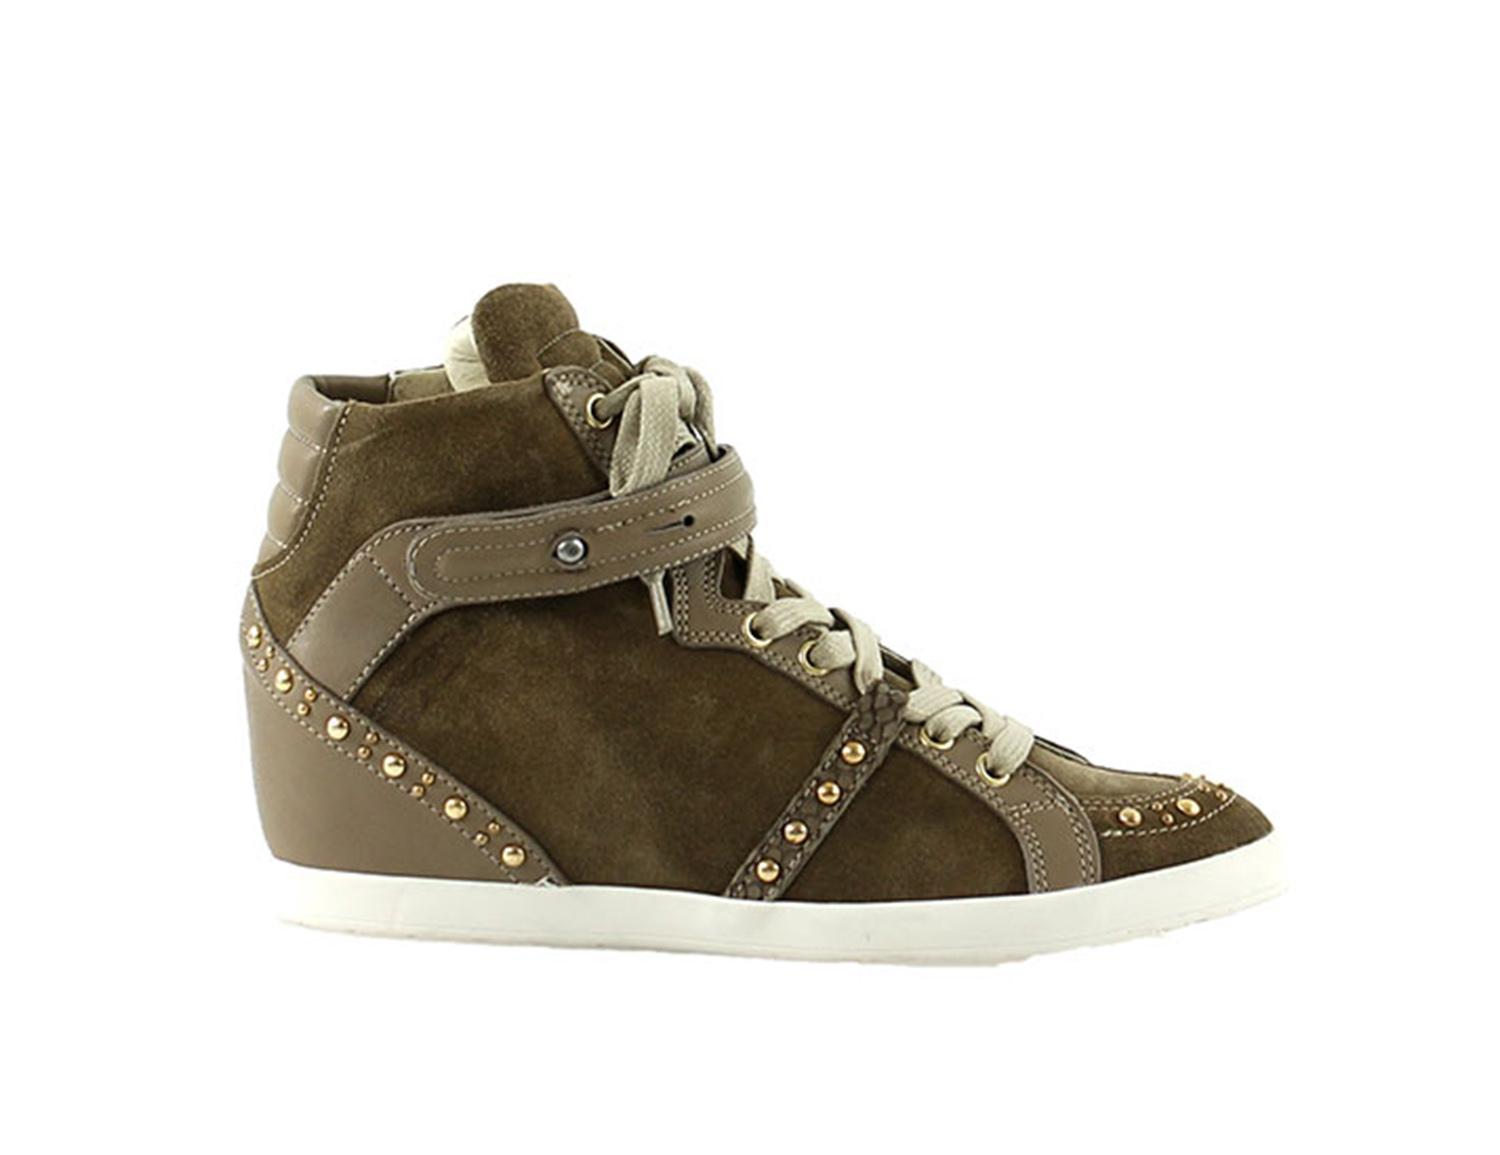 Wedge - March23 - 239 euro